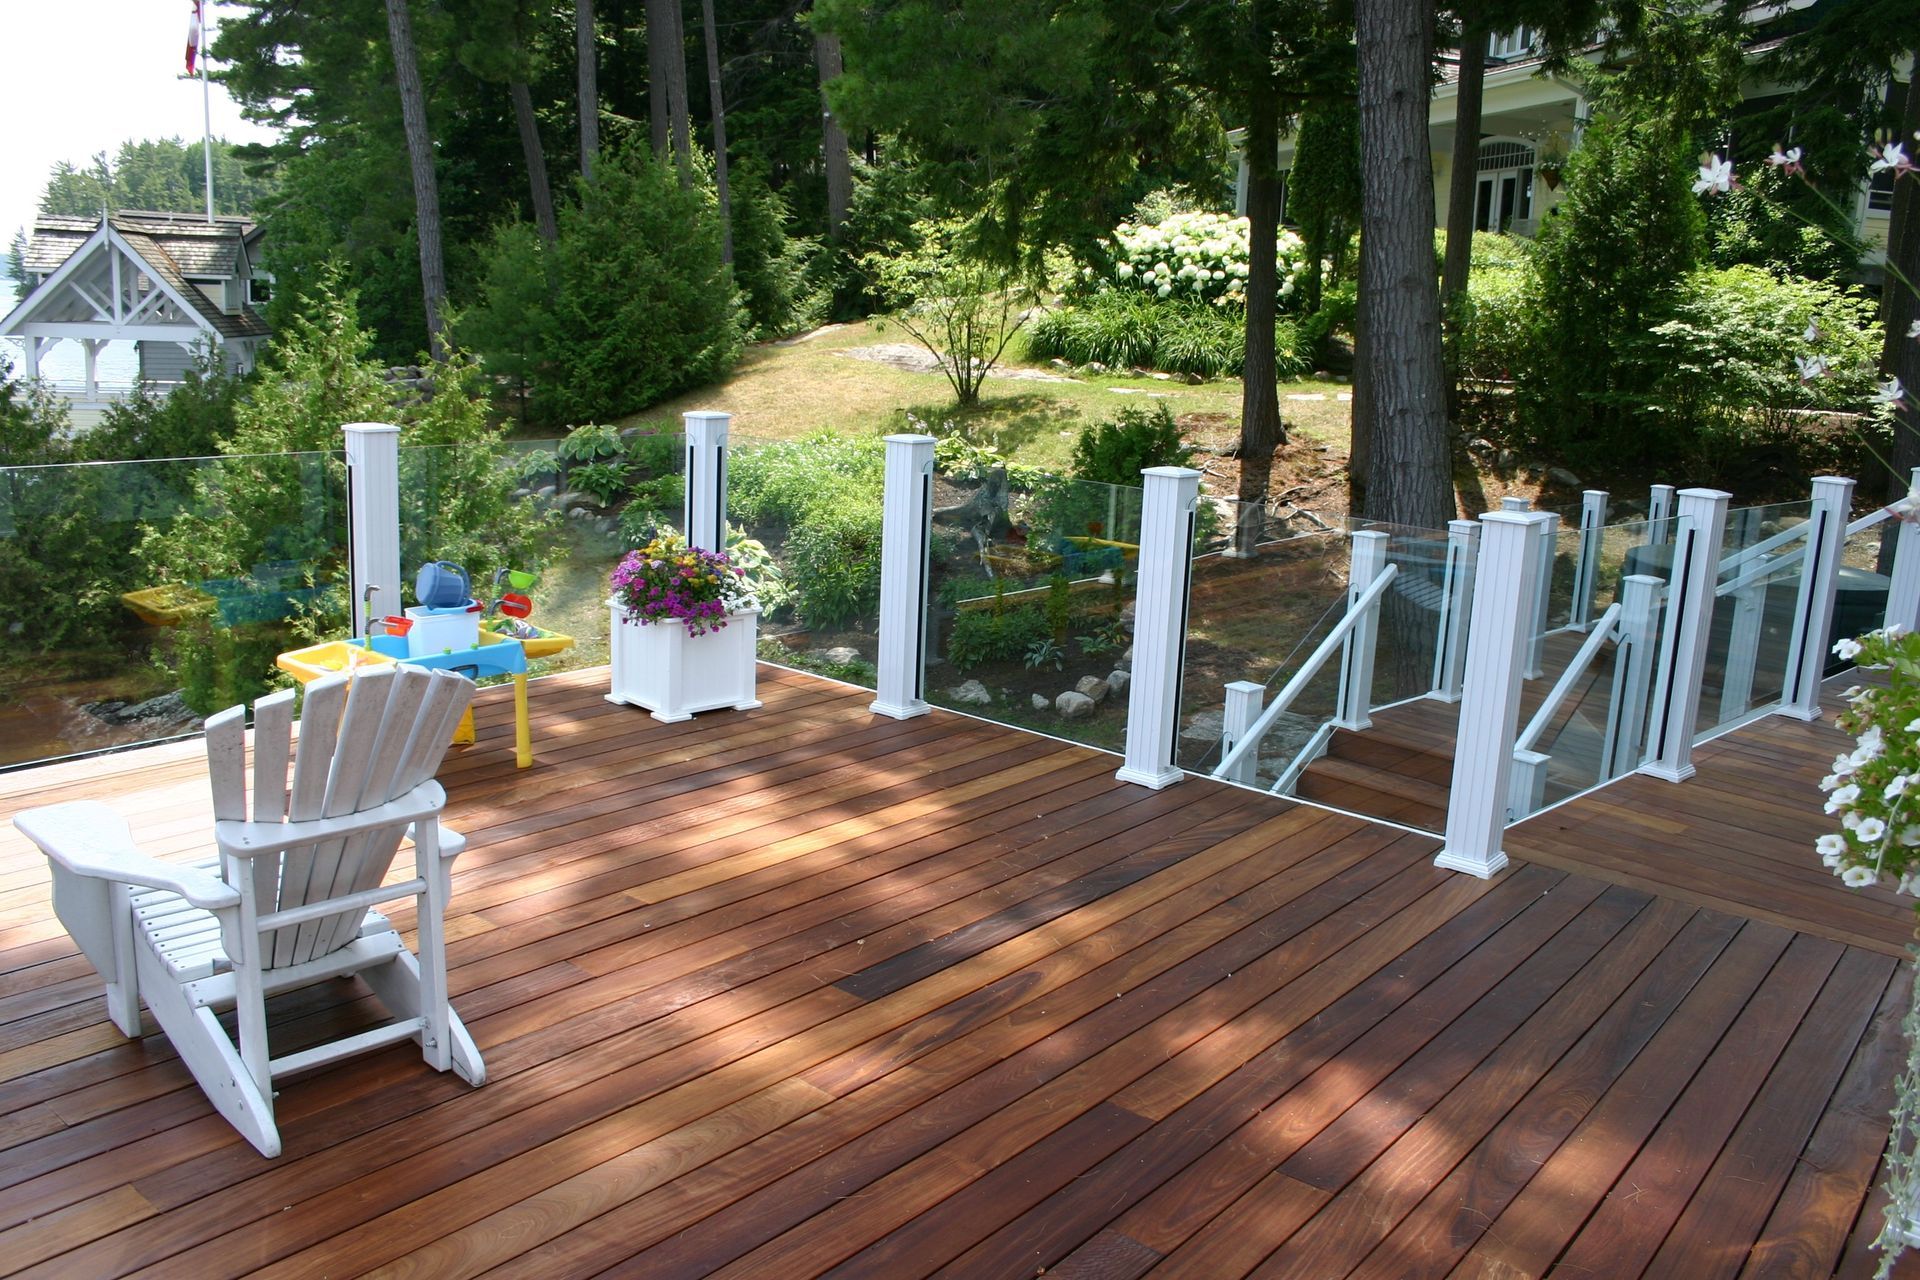 A wooden deck with a rocking chair on it